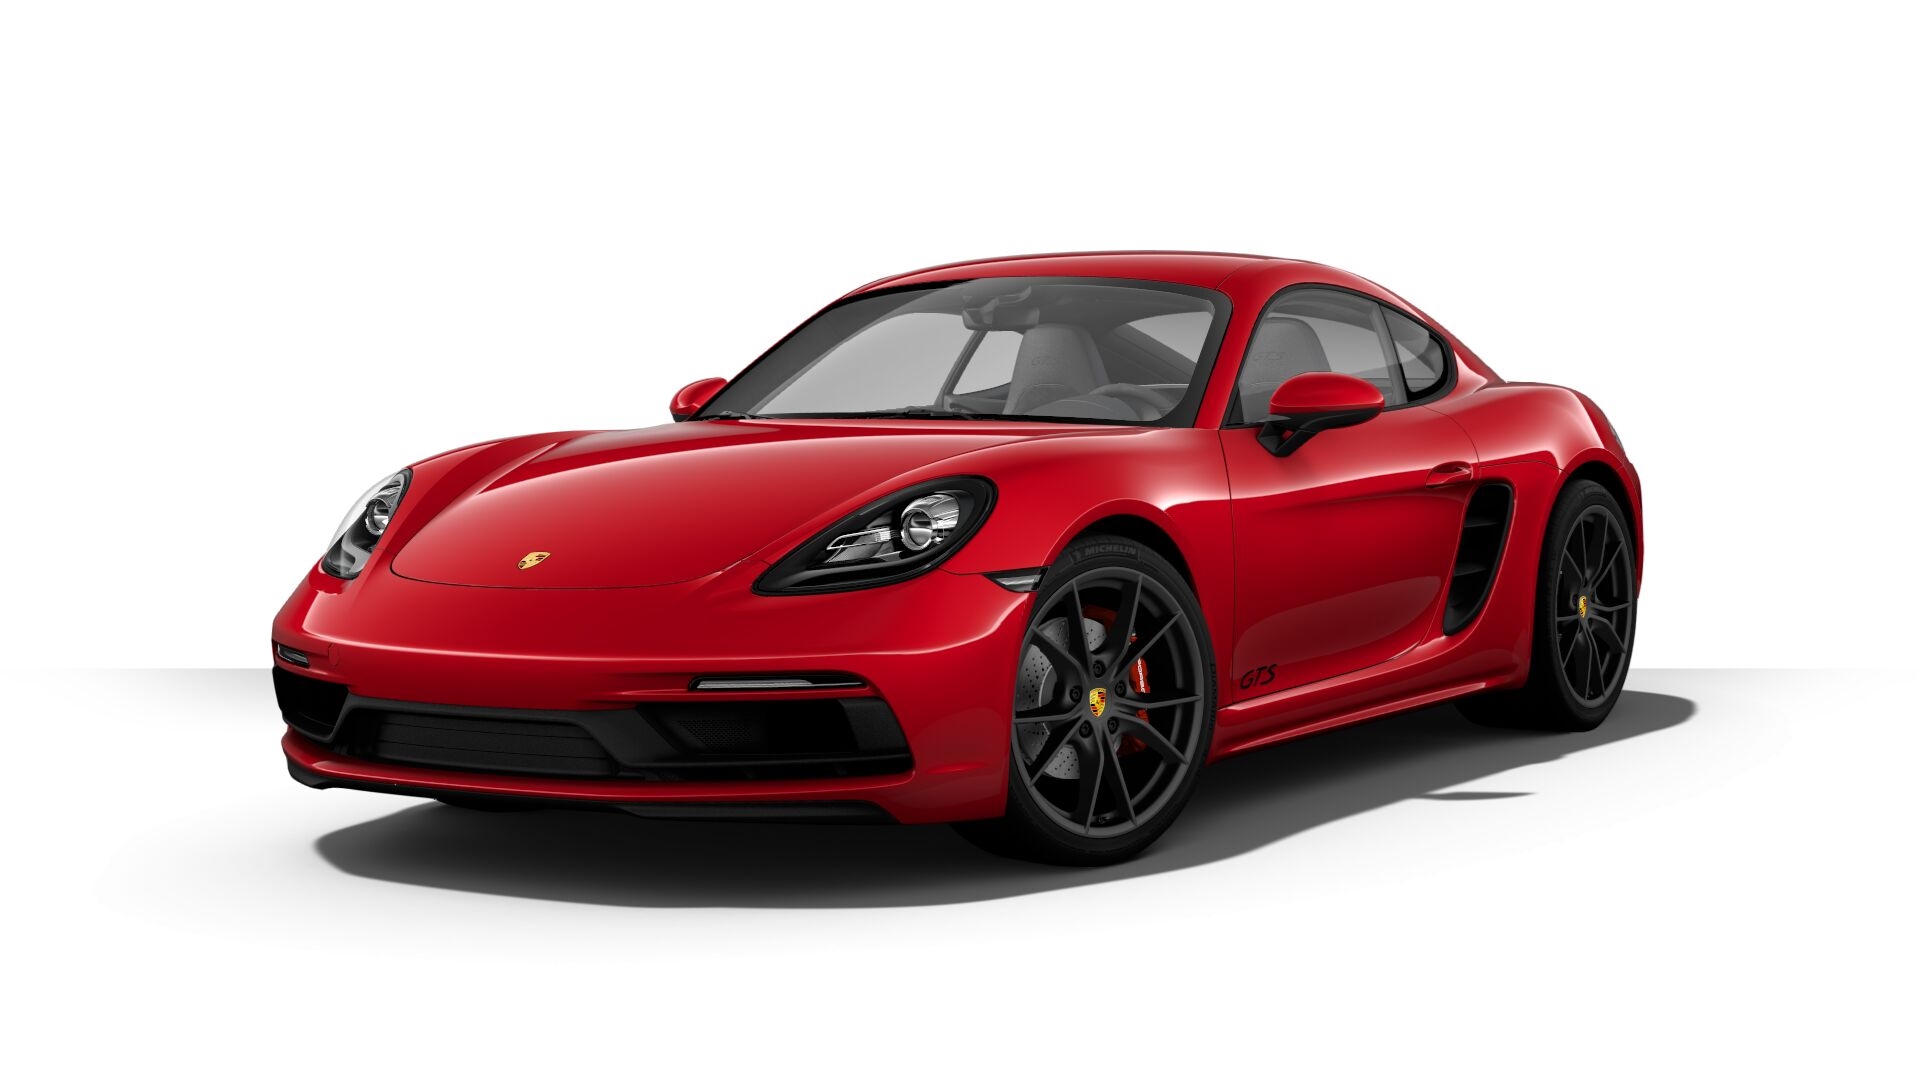 2021 Porsche 718 Cayman Cayman GTS 4.0 Full Specs, Features and Price